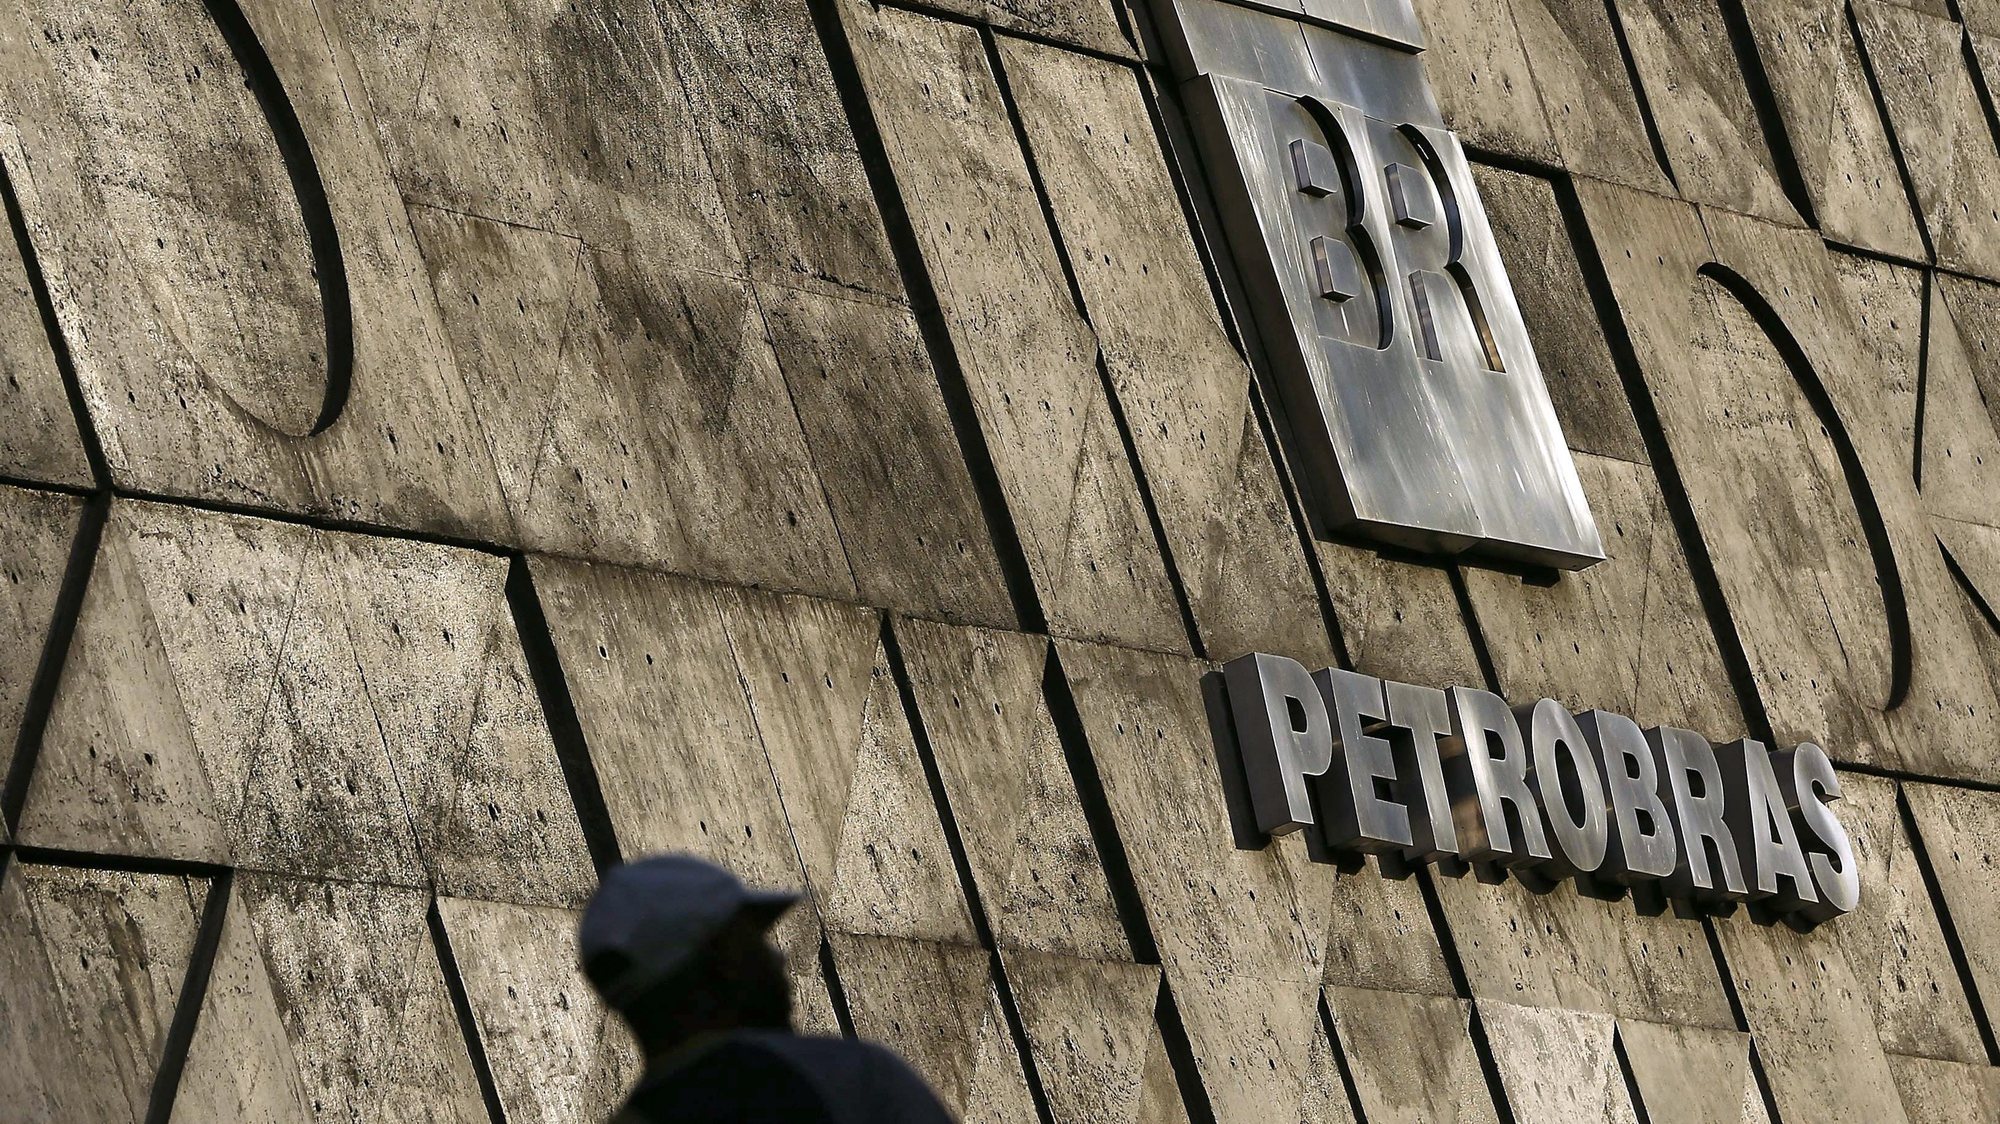 epa08423242 (FILE) - A person walks past a sign at the headquarters of state-run oil company Petrobras in Rio de Janeiro, Brazil 24 April 2015 (reissued 15 April 2020). According to media reports, Petrobras posted a net loss of 8.35 US dollars for its first quarter.  EPA/MARCELO SAYAO